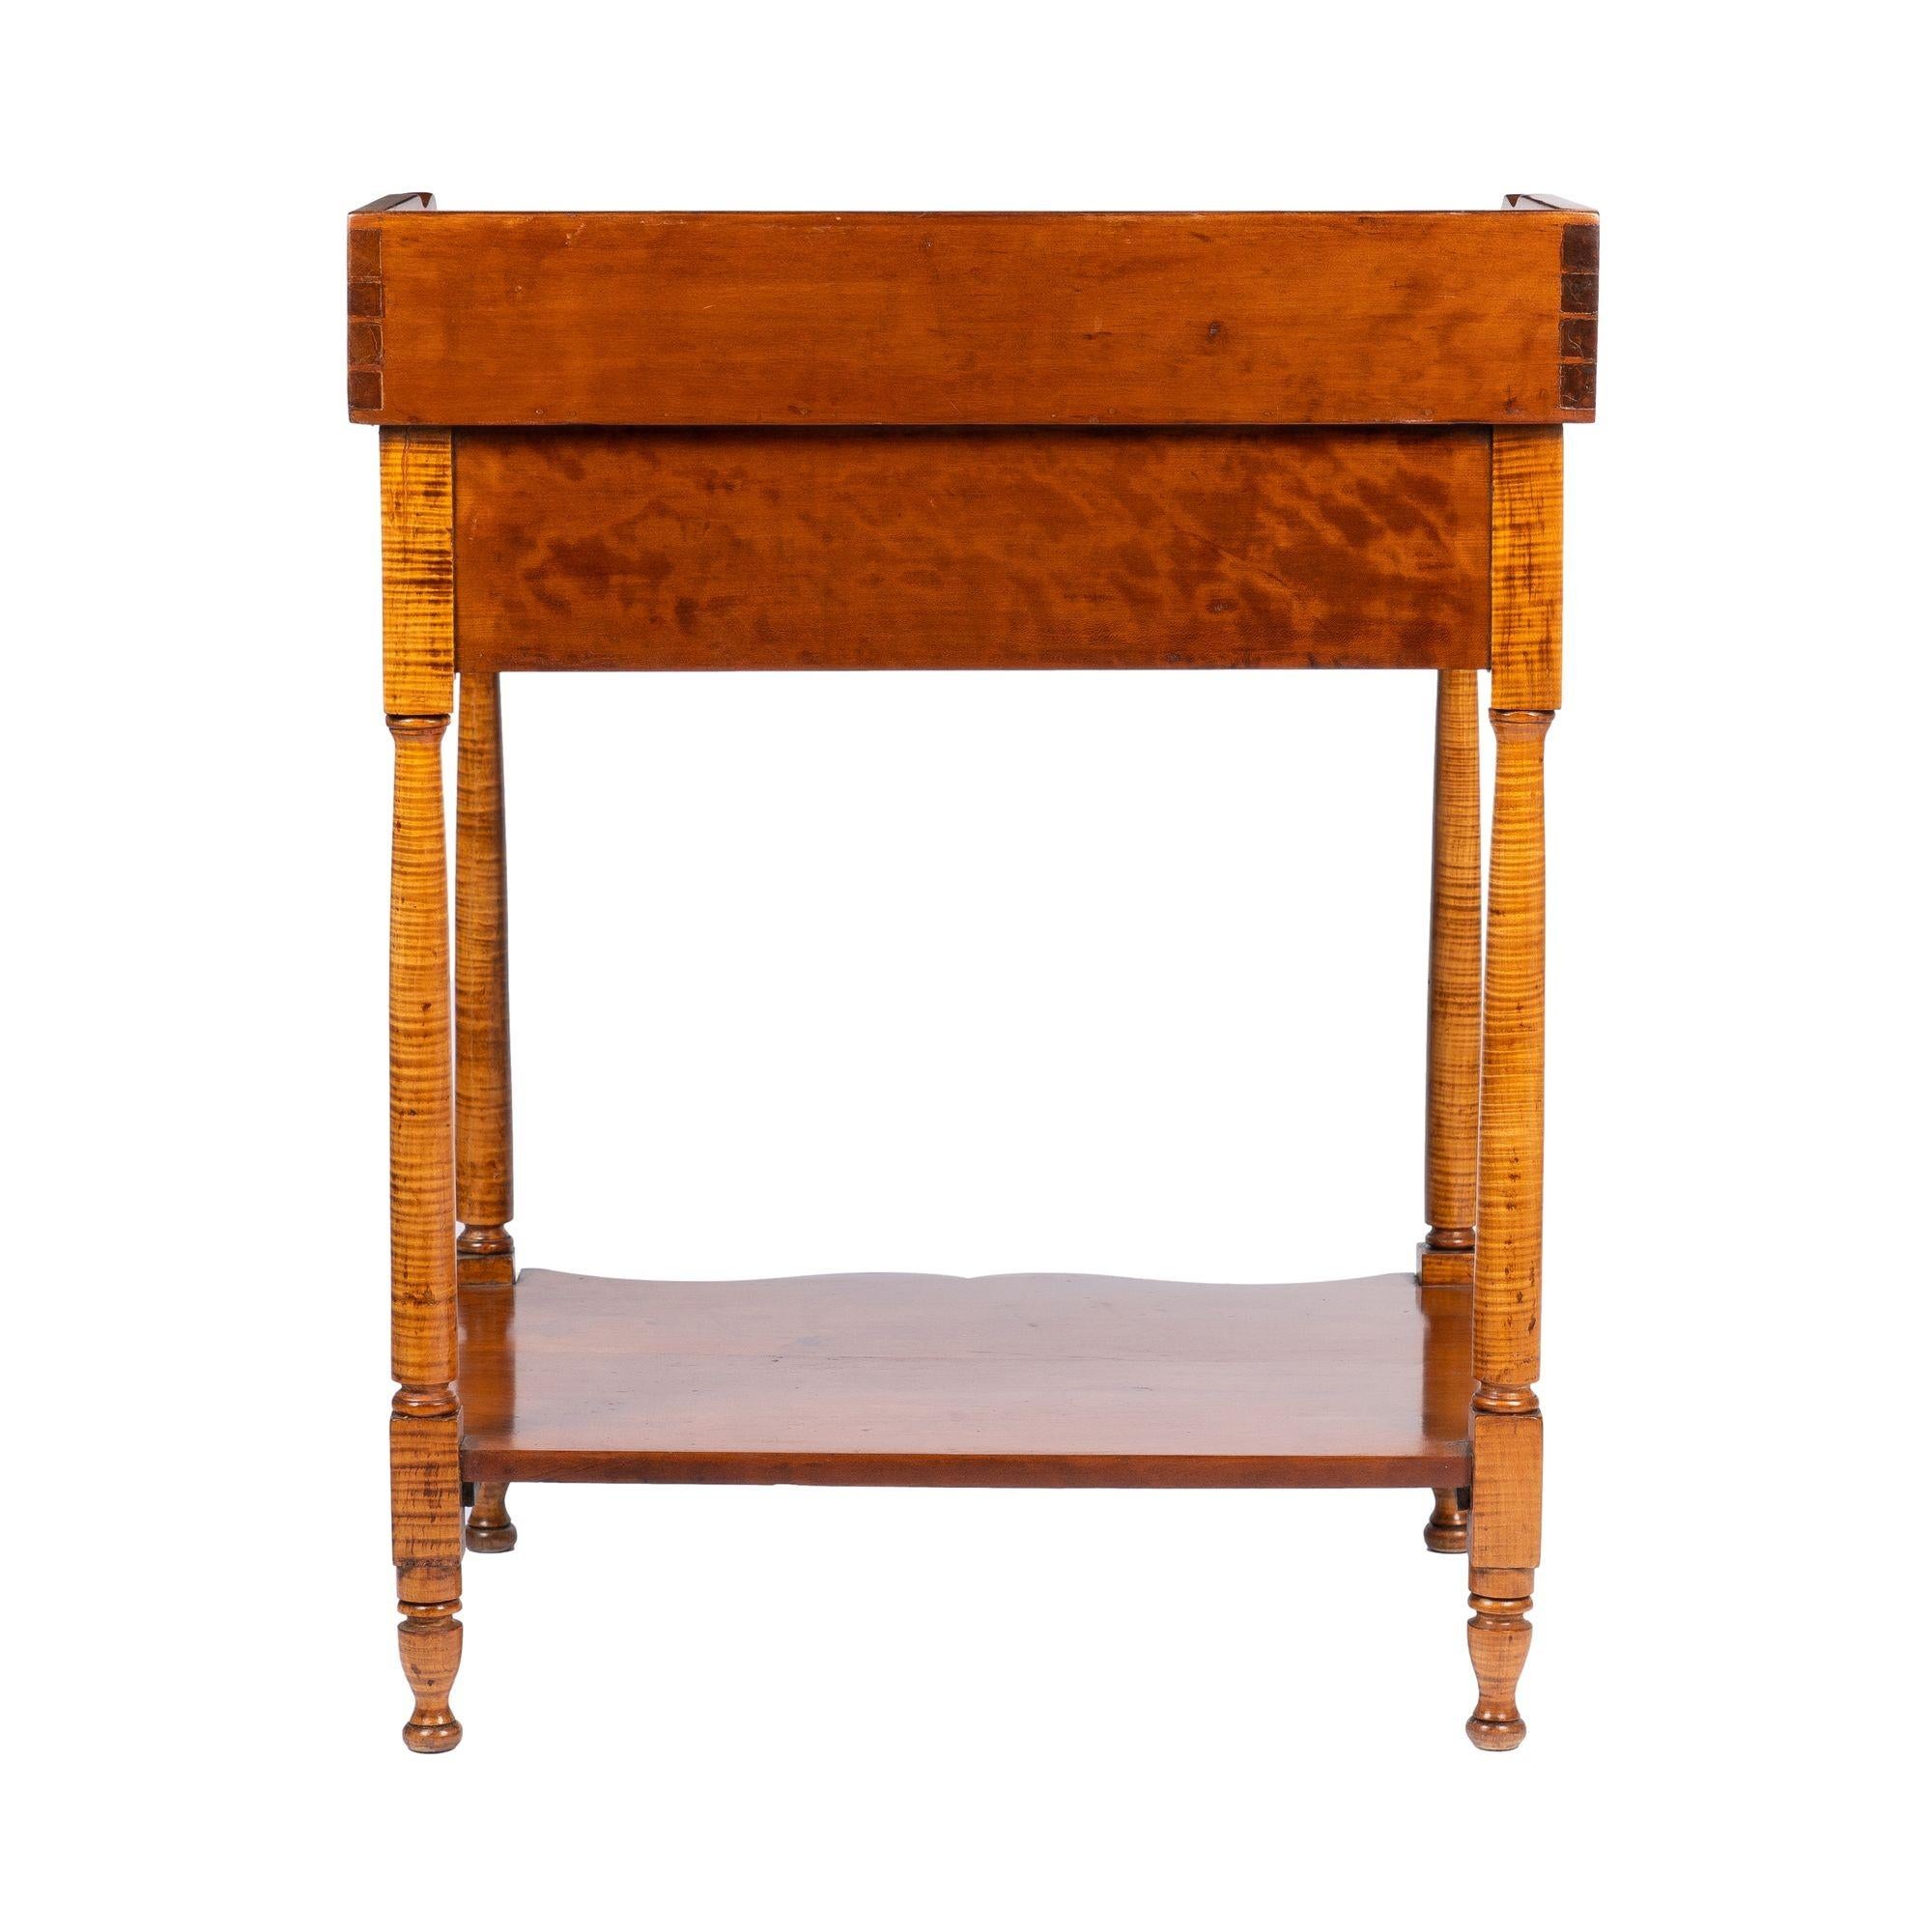 Philadelphia Cherry Wood Stand with Splash on a Conforming Apron, 1820 In Good Condition For Sale In Kenilworth, IL